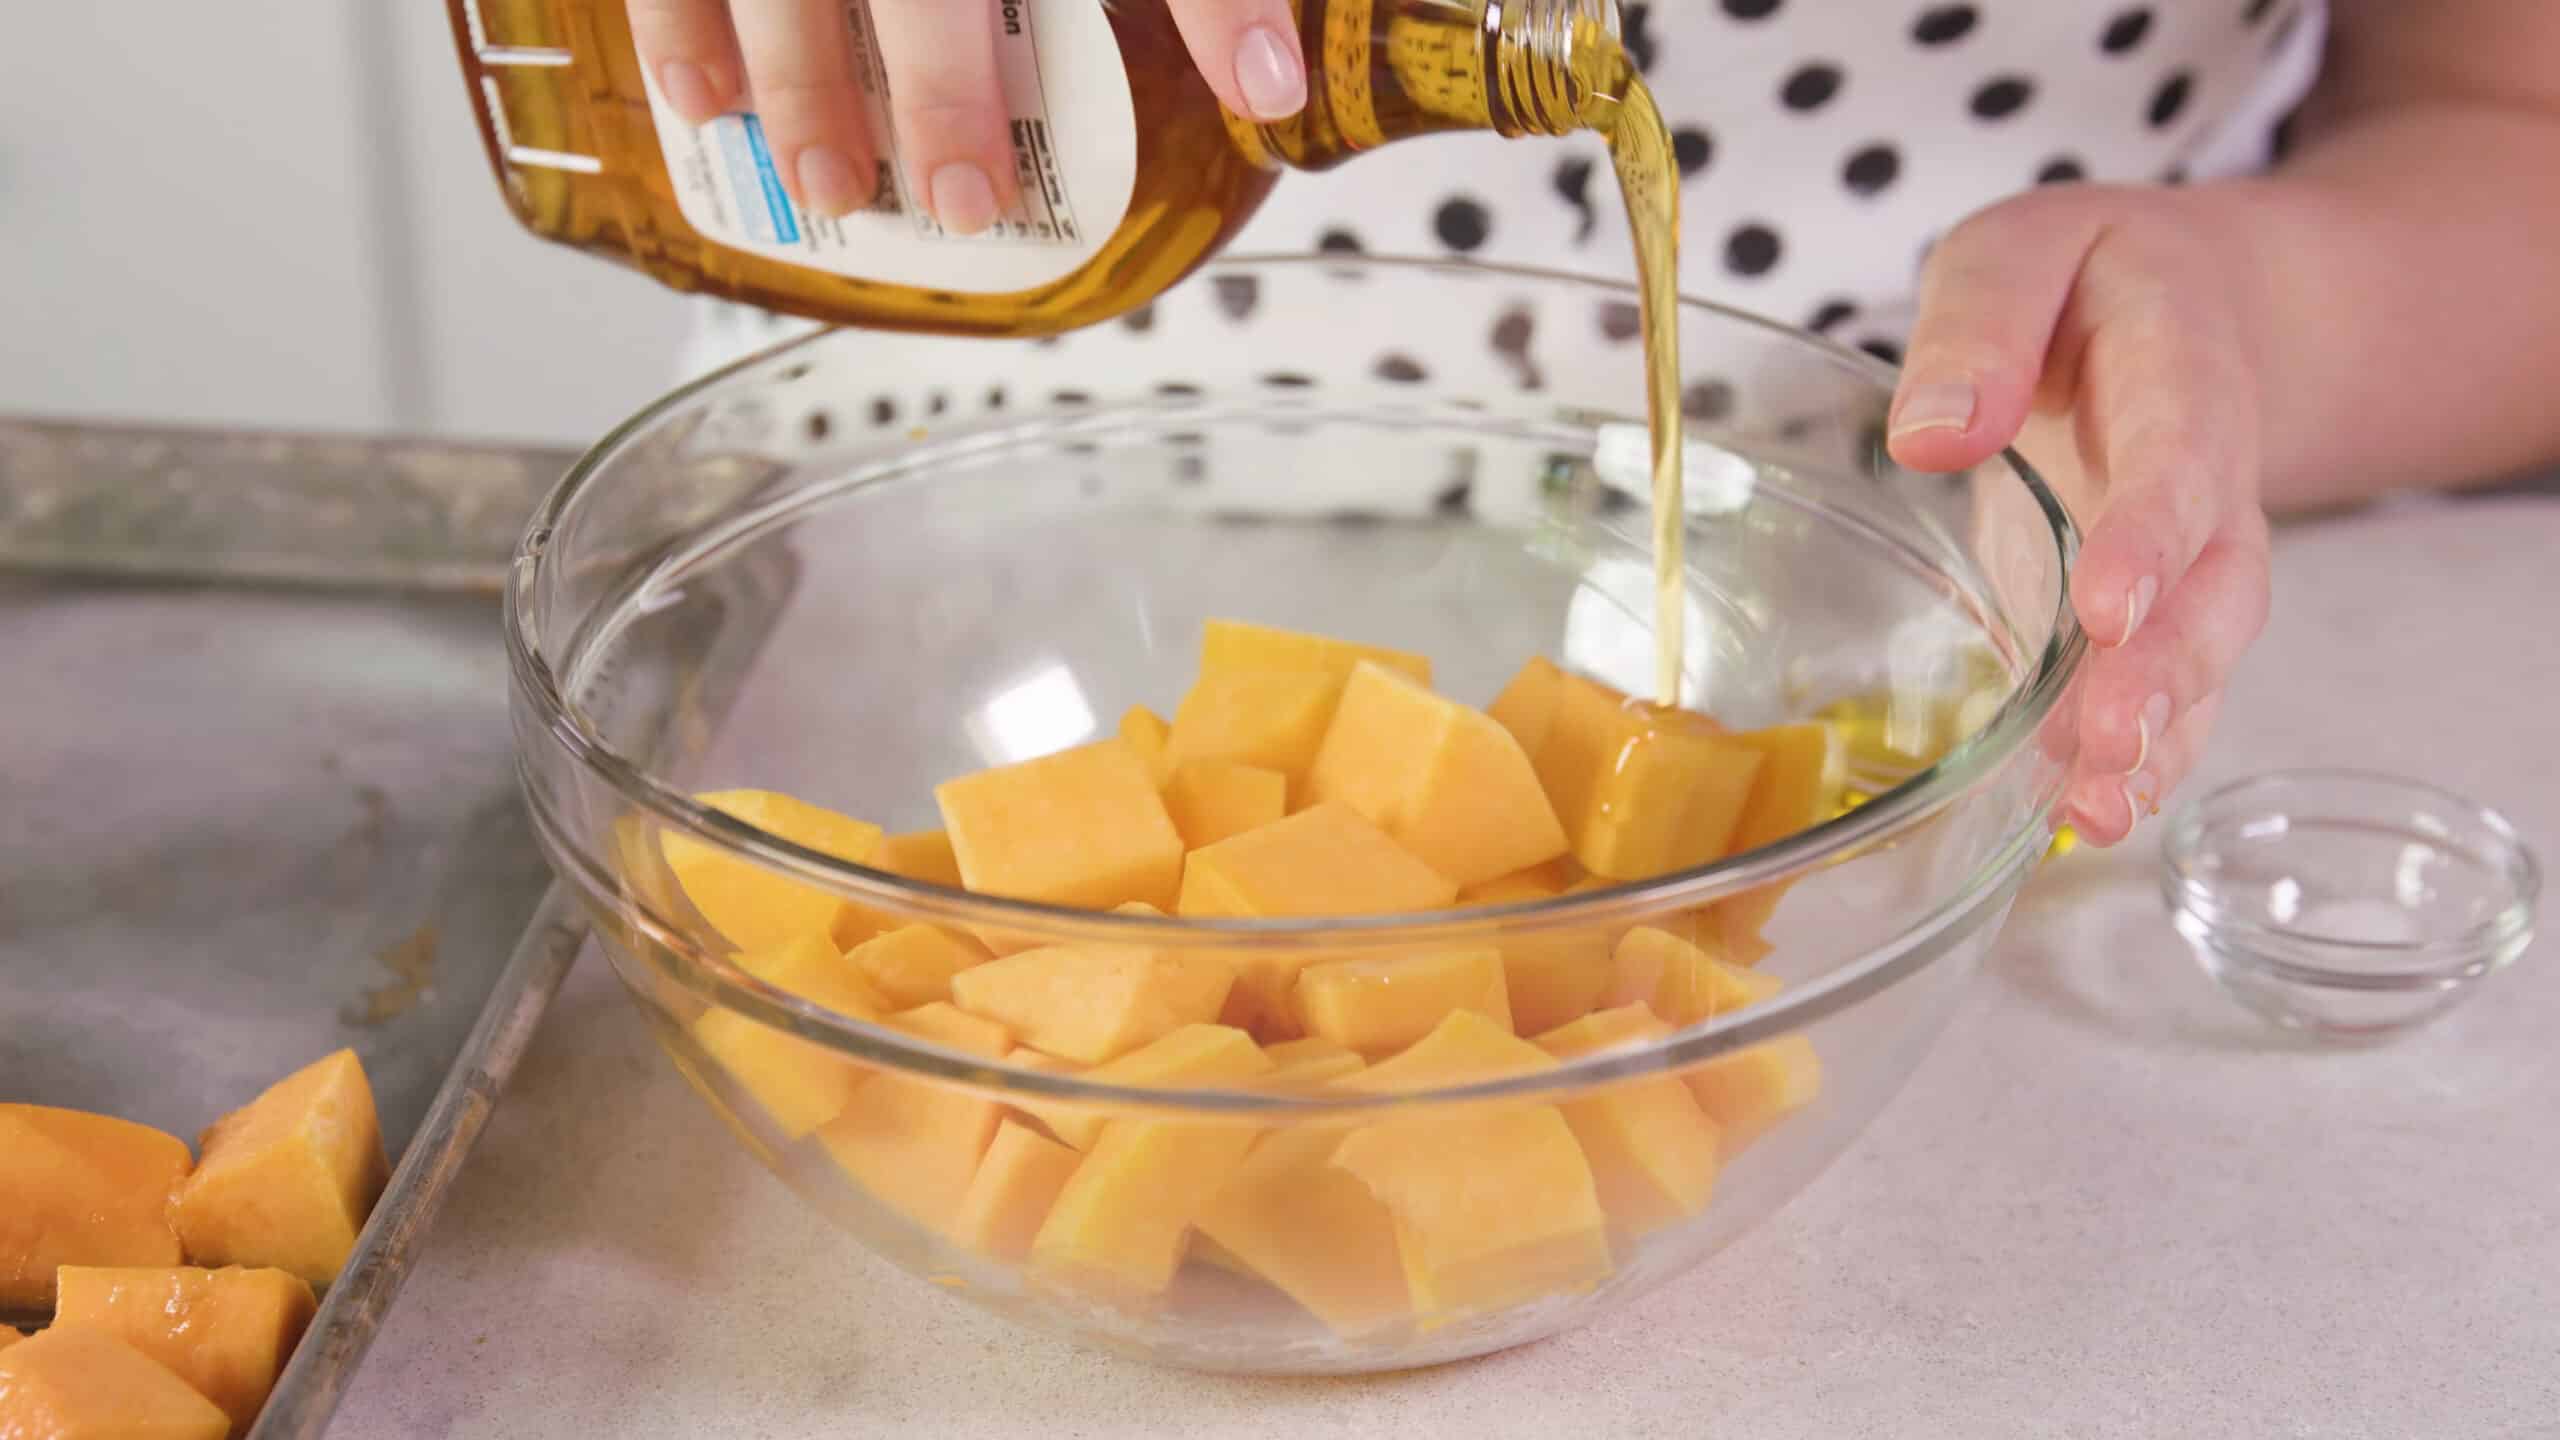 Angled view of clear mixing bowl filled with diced butternut squash and a bottle of maple syrup pouring over the top of the squash for flavoring.